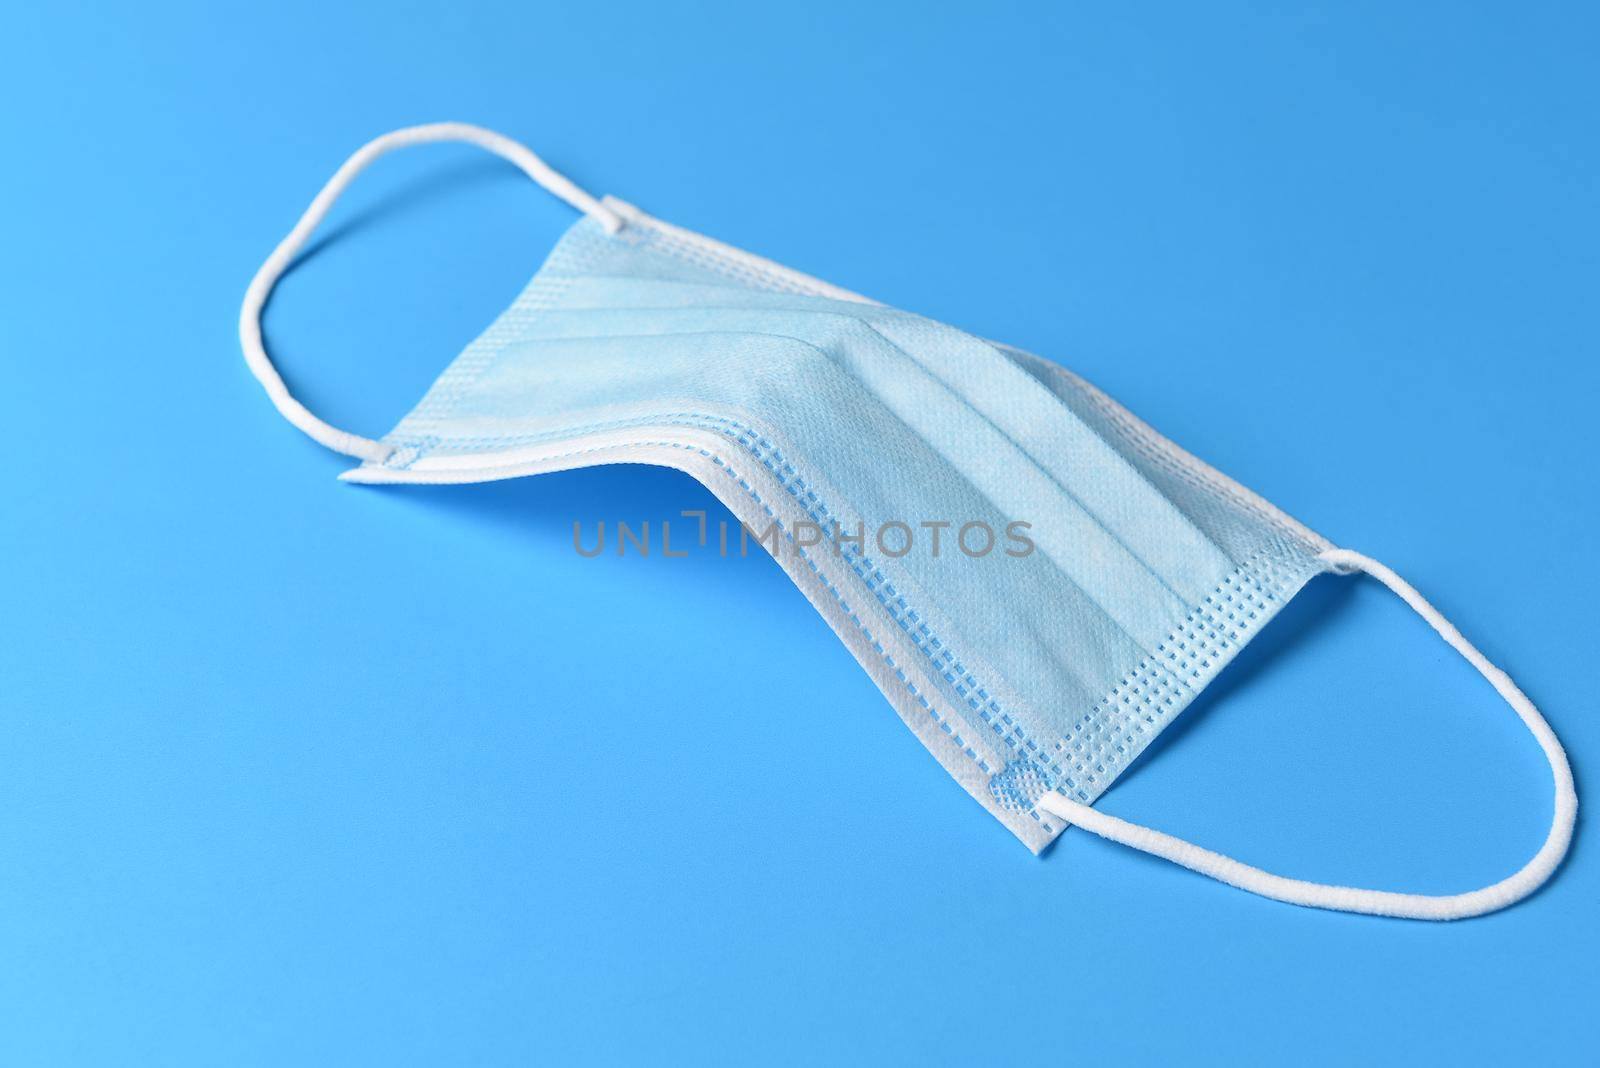 PPE Covid-19 concept. A surgical mask on a blue background. by sCukrov